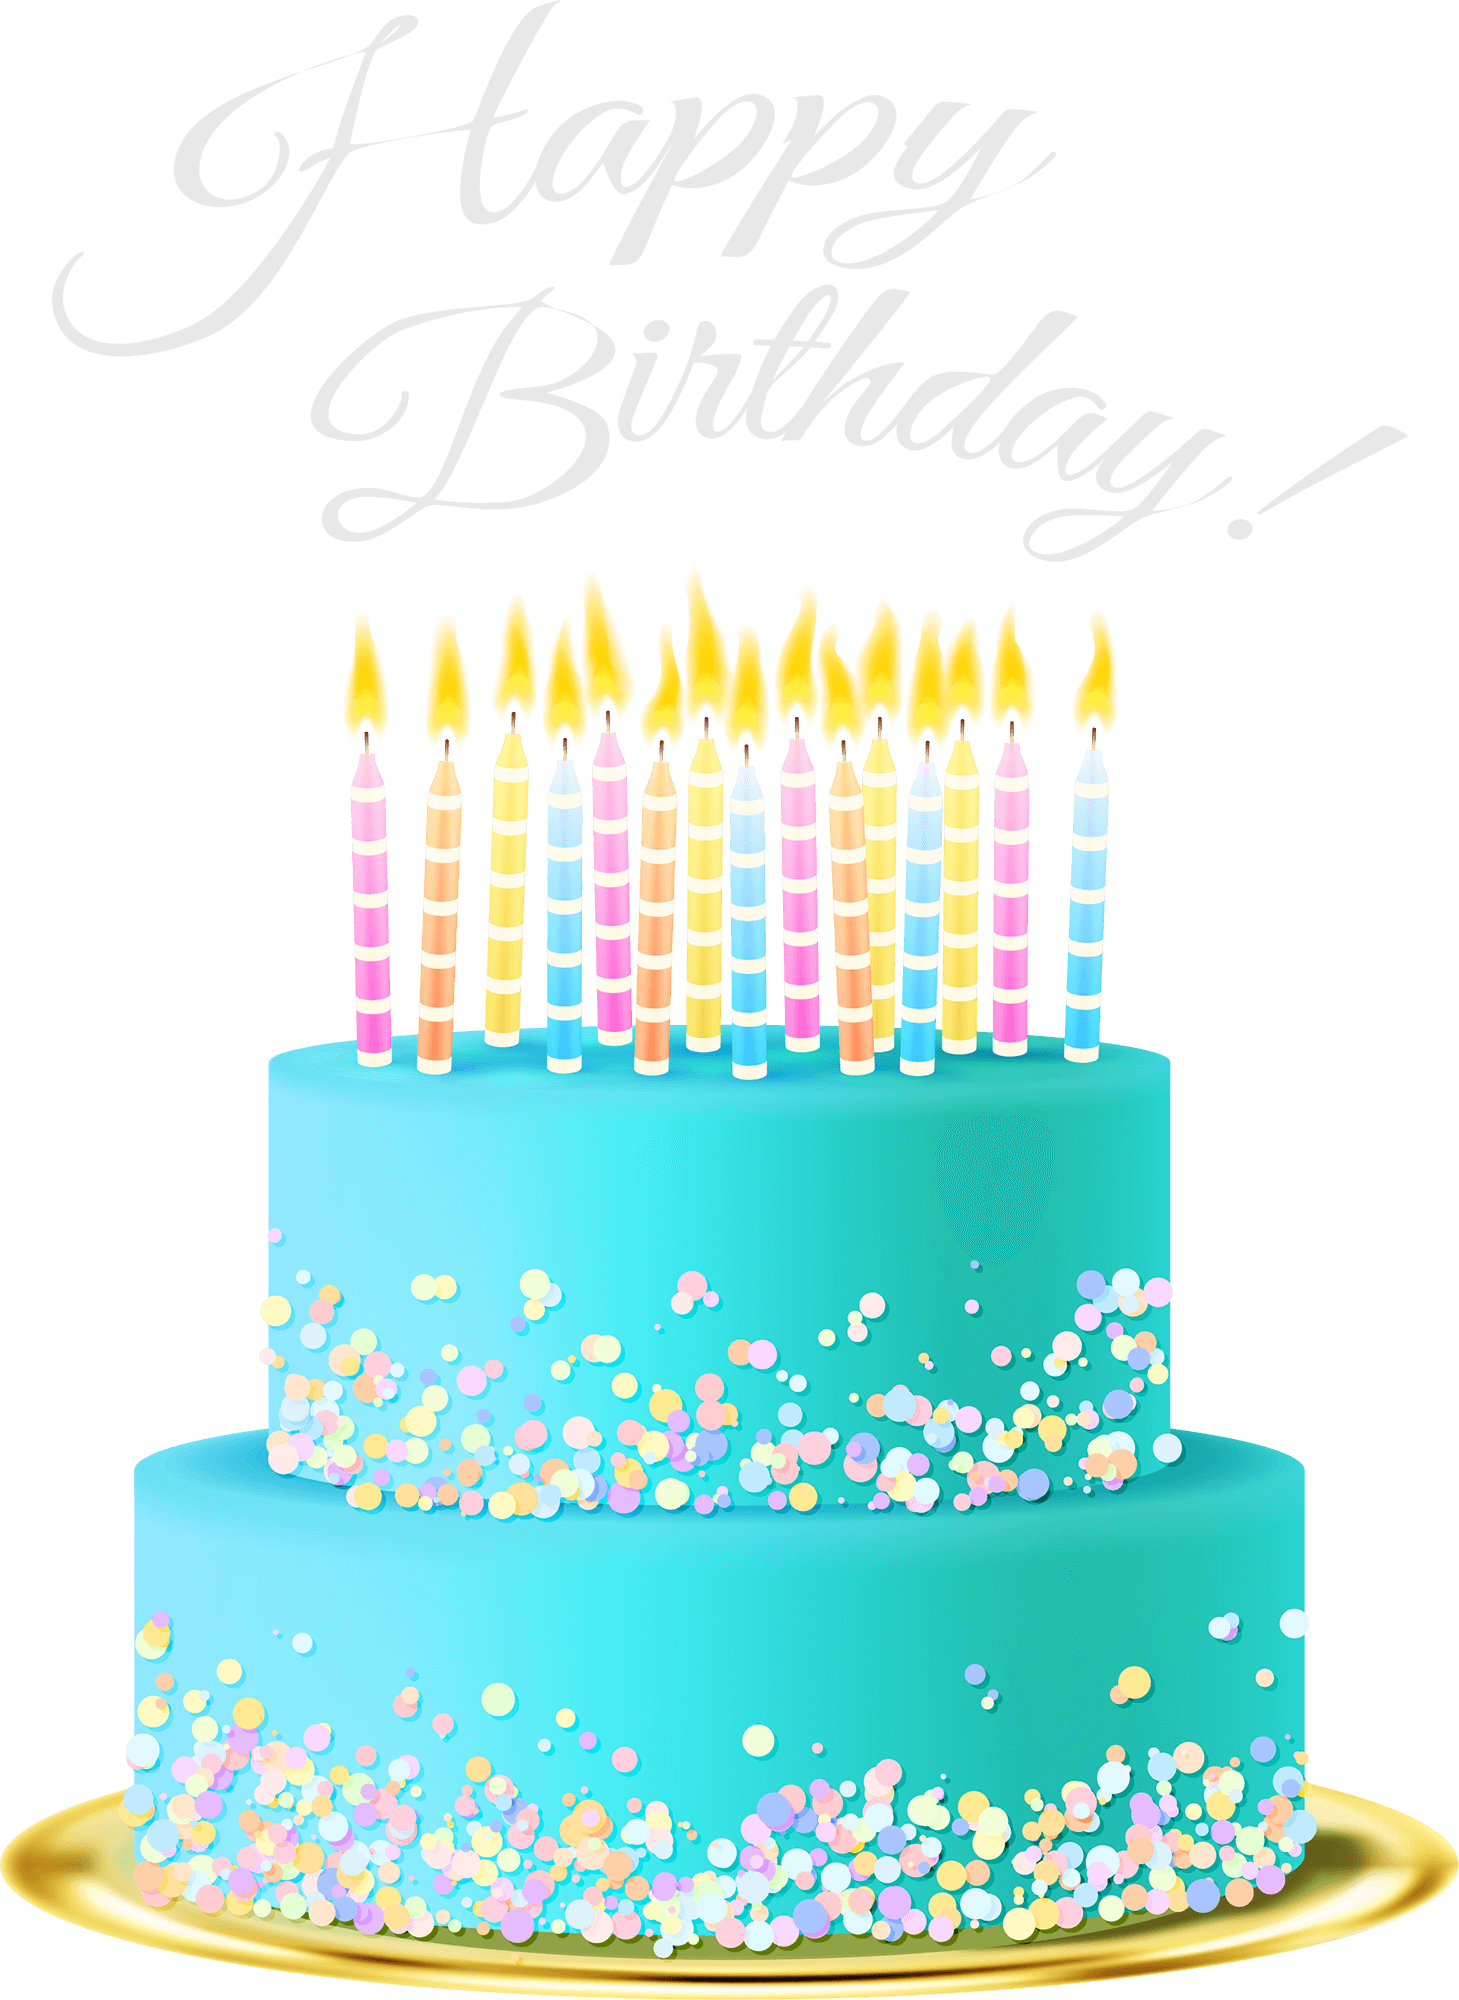 Best Birthday CAKE png images FREE - Transparent Background